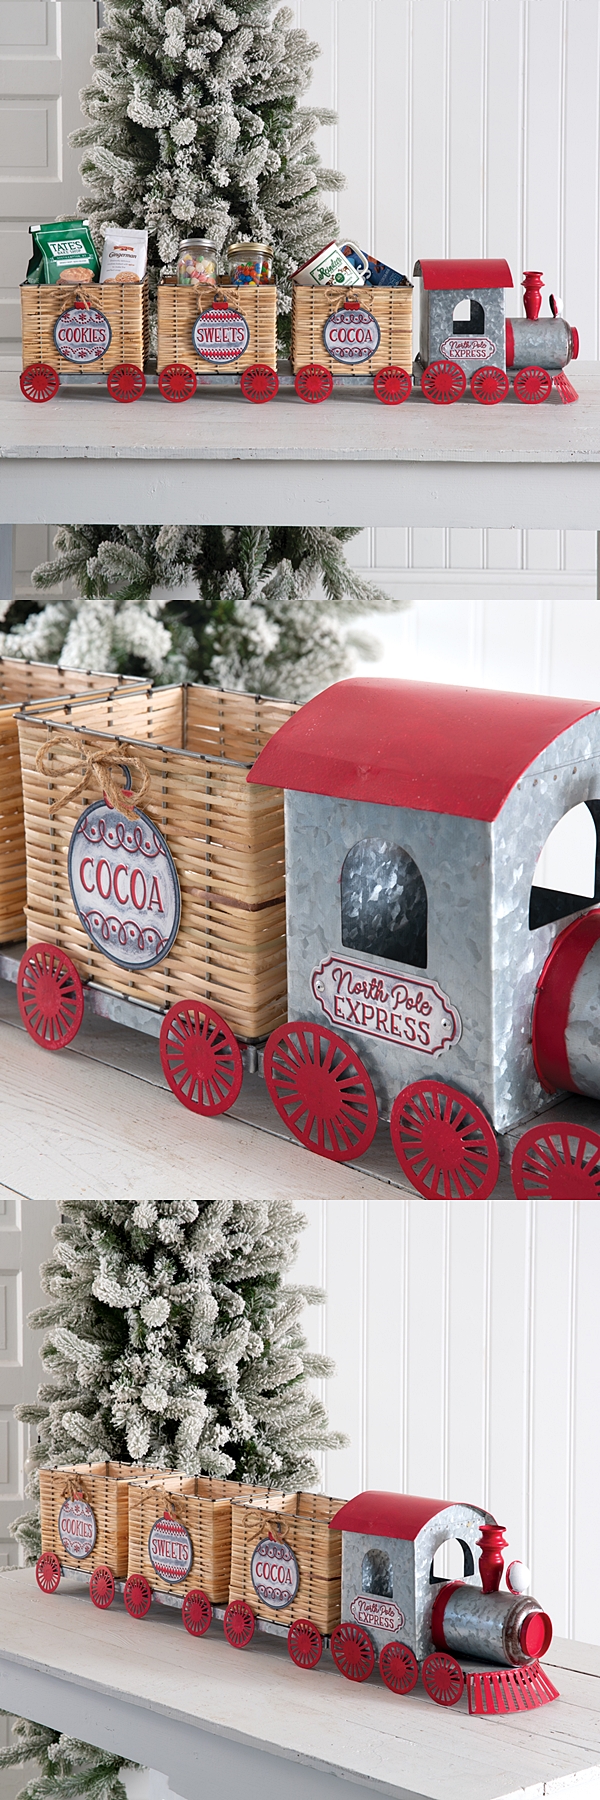 CTW Home Collection North Pole Express Galvanized Train with Baskets